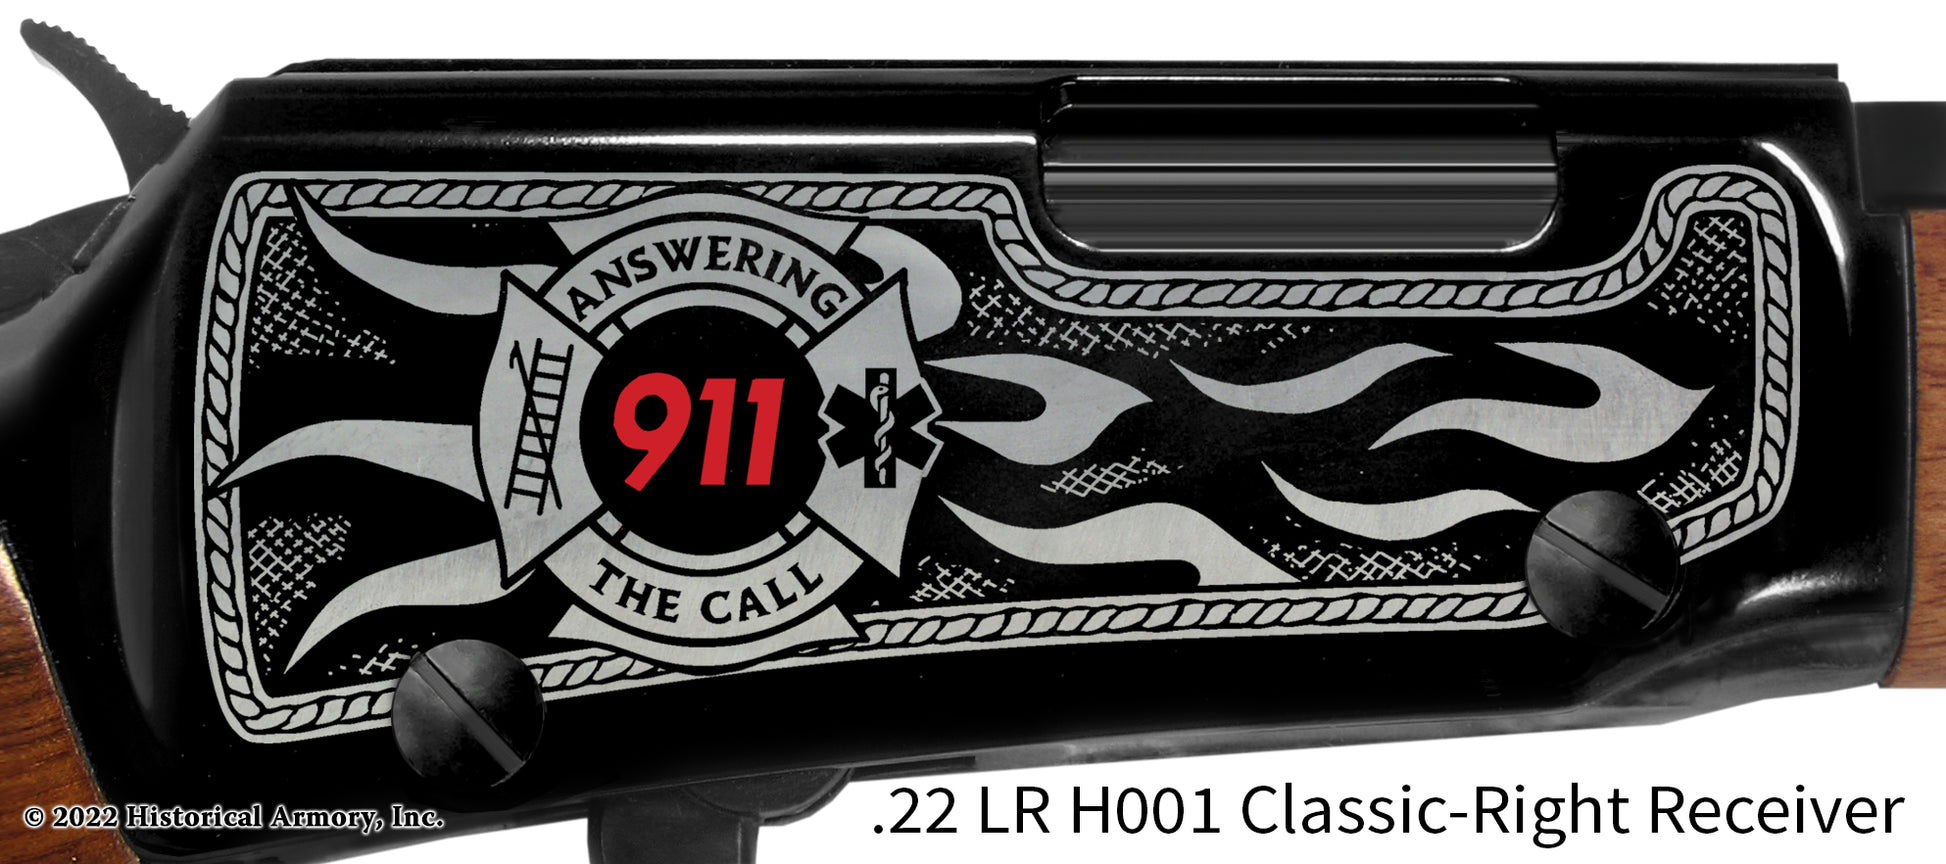 Firefighter Tradition of Answering the Call 911 Engraved Rifle Limited Edition